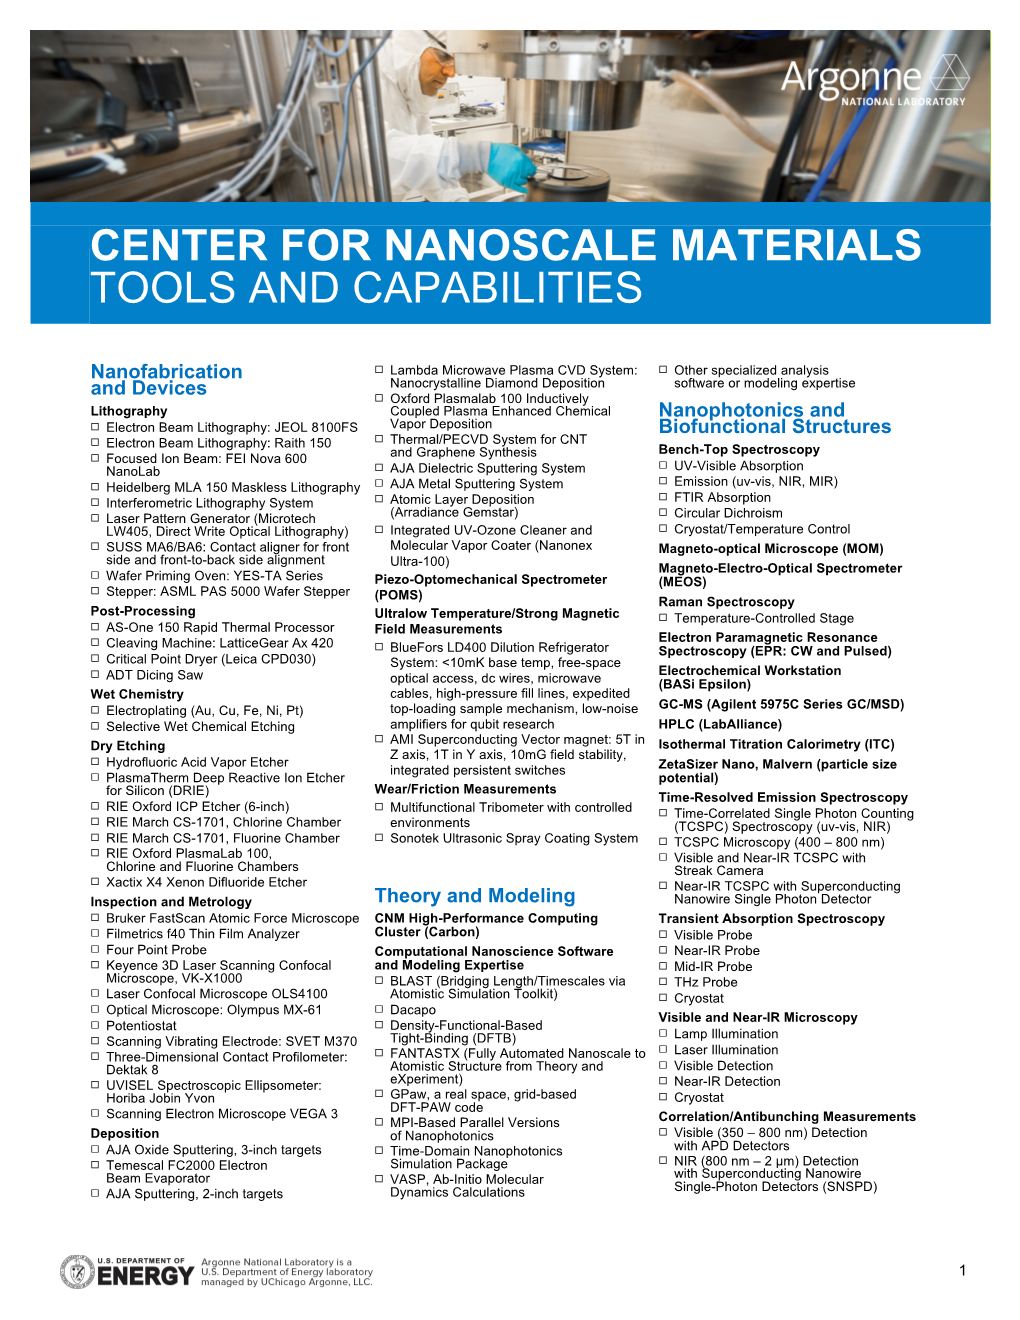 Center for Nanoscale Materials Tools and Capabilities